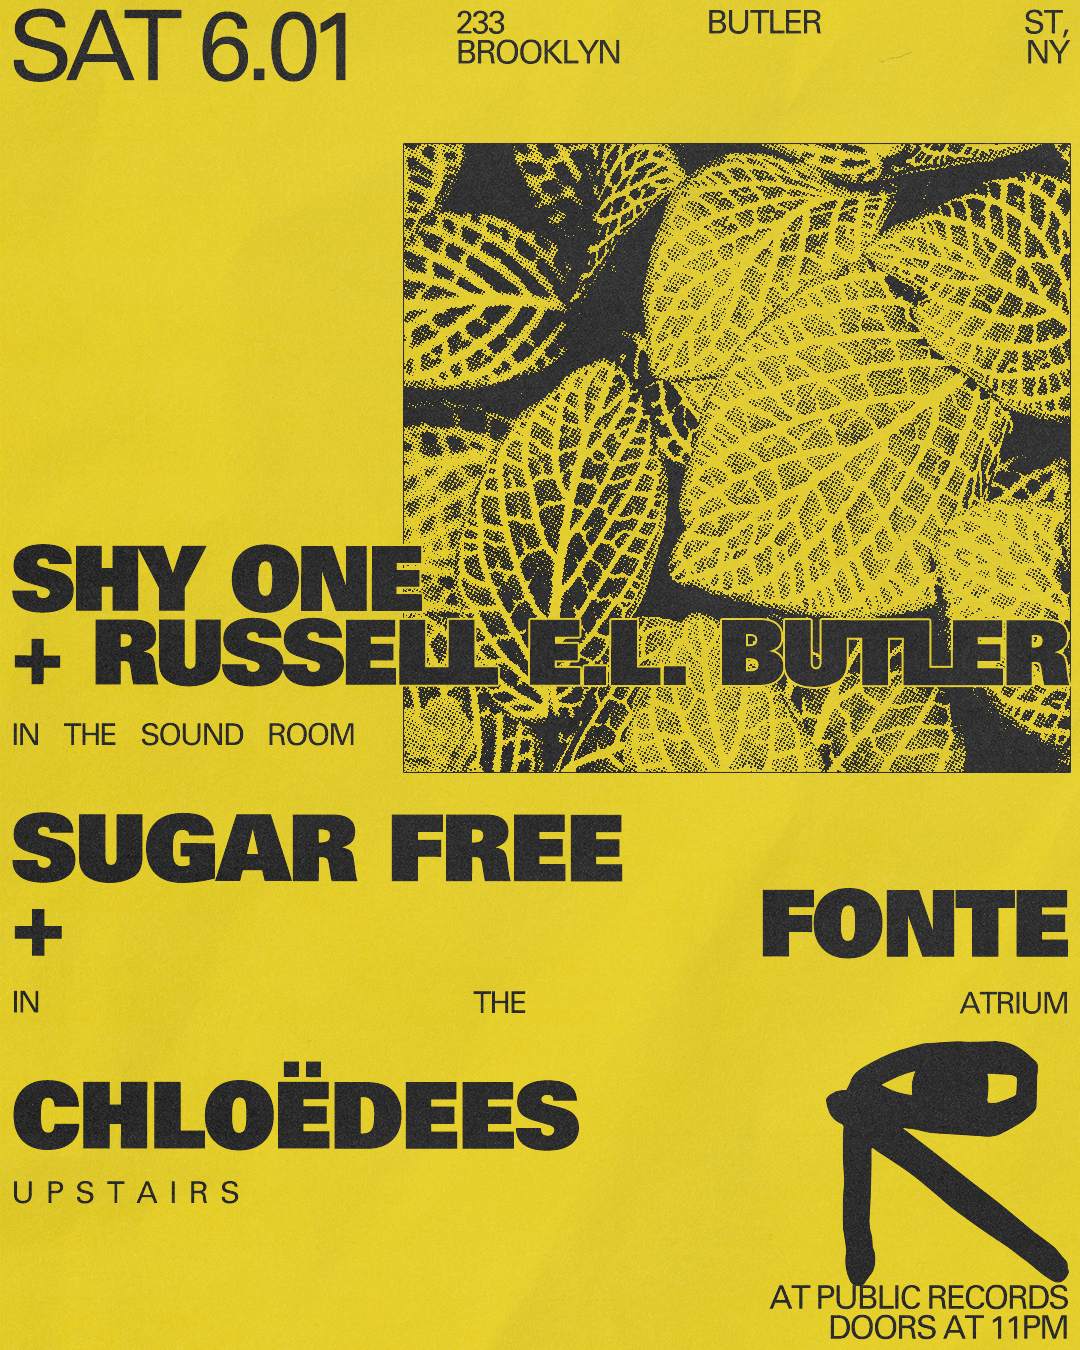 Shy One + Russell E.L. Butler / Sugar Free + Fonte / Chloëdees - フライヤー表